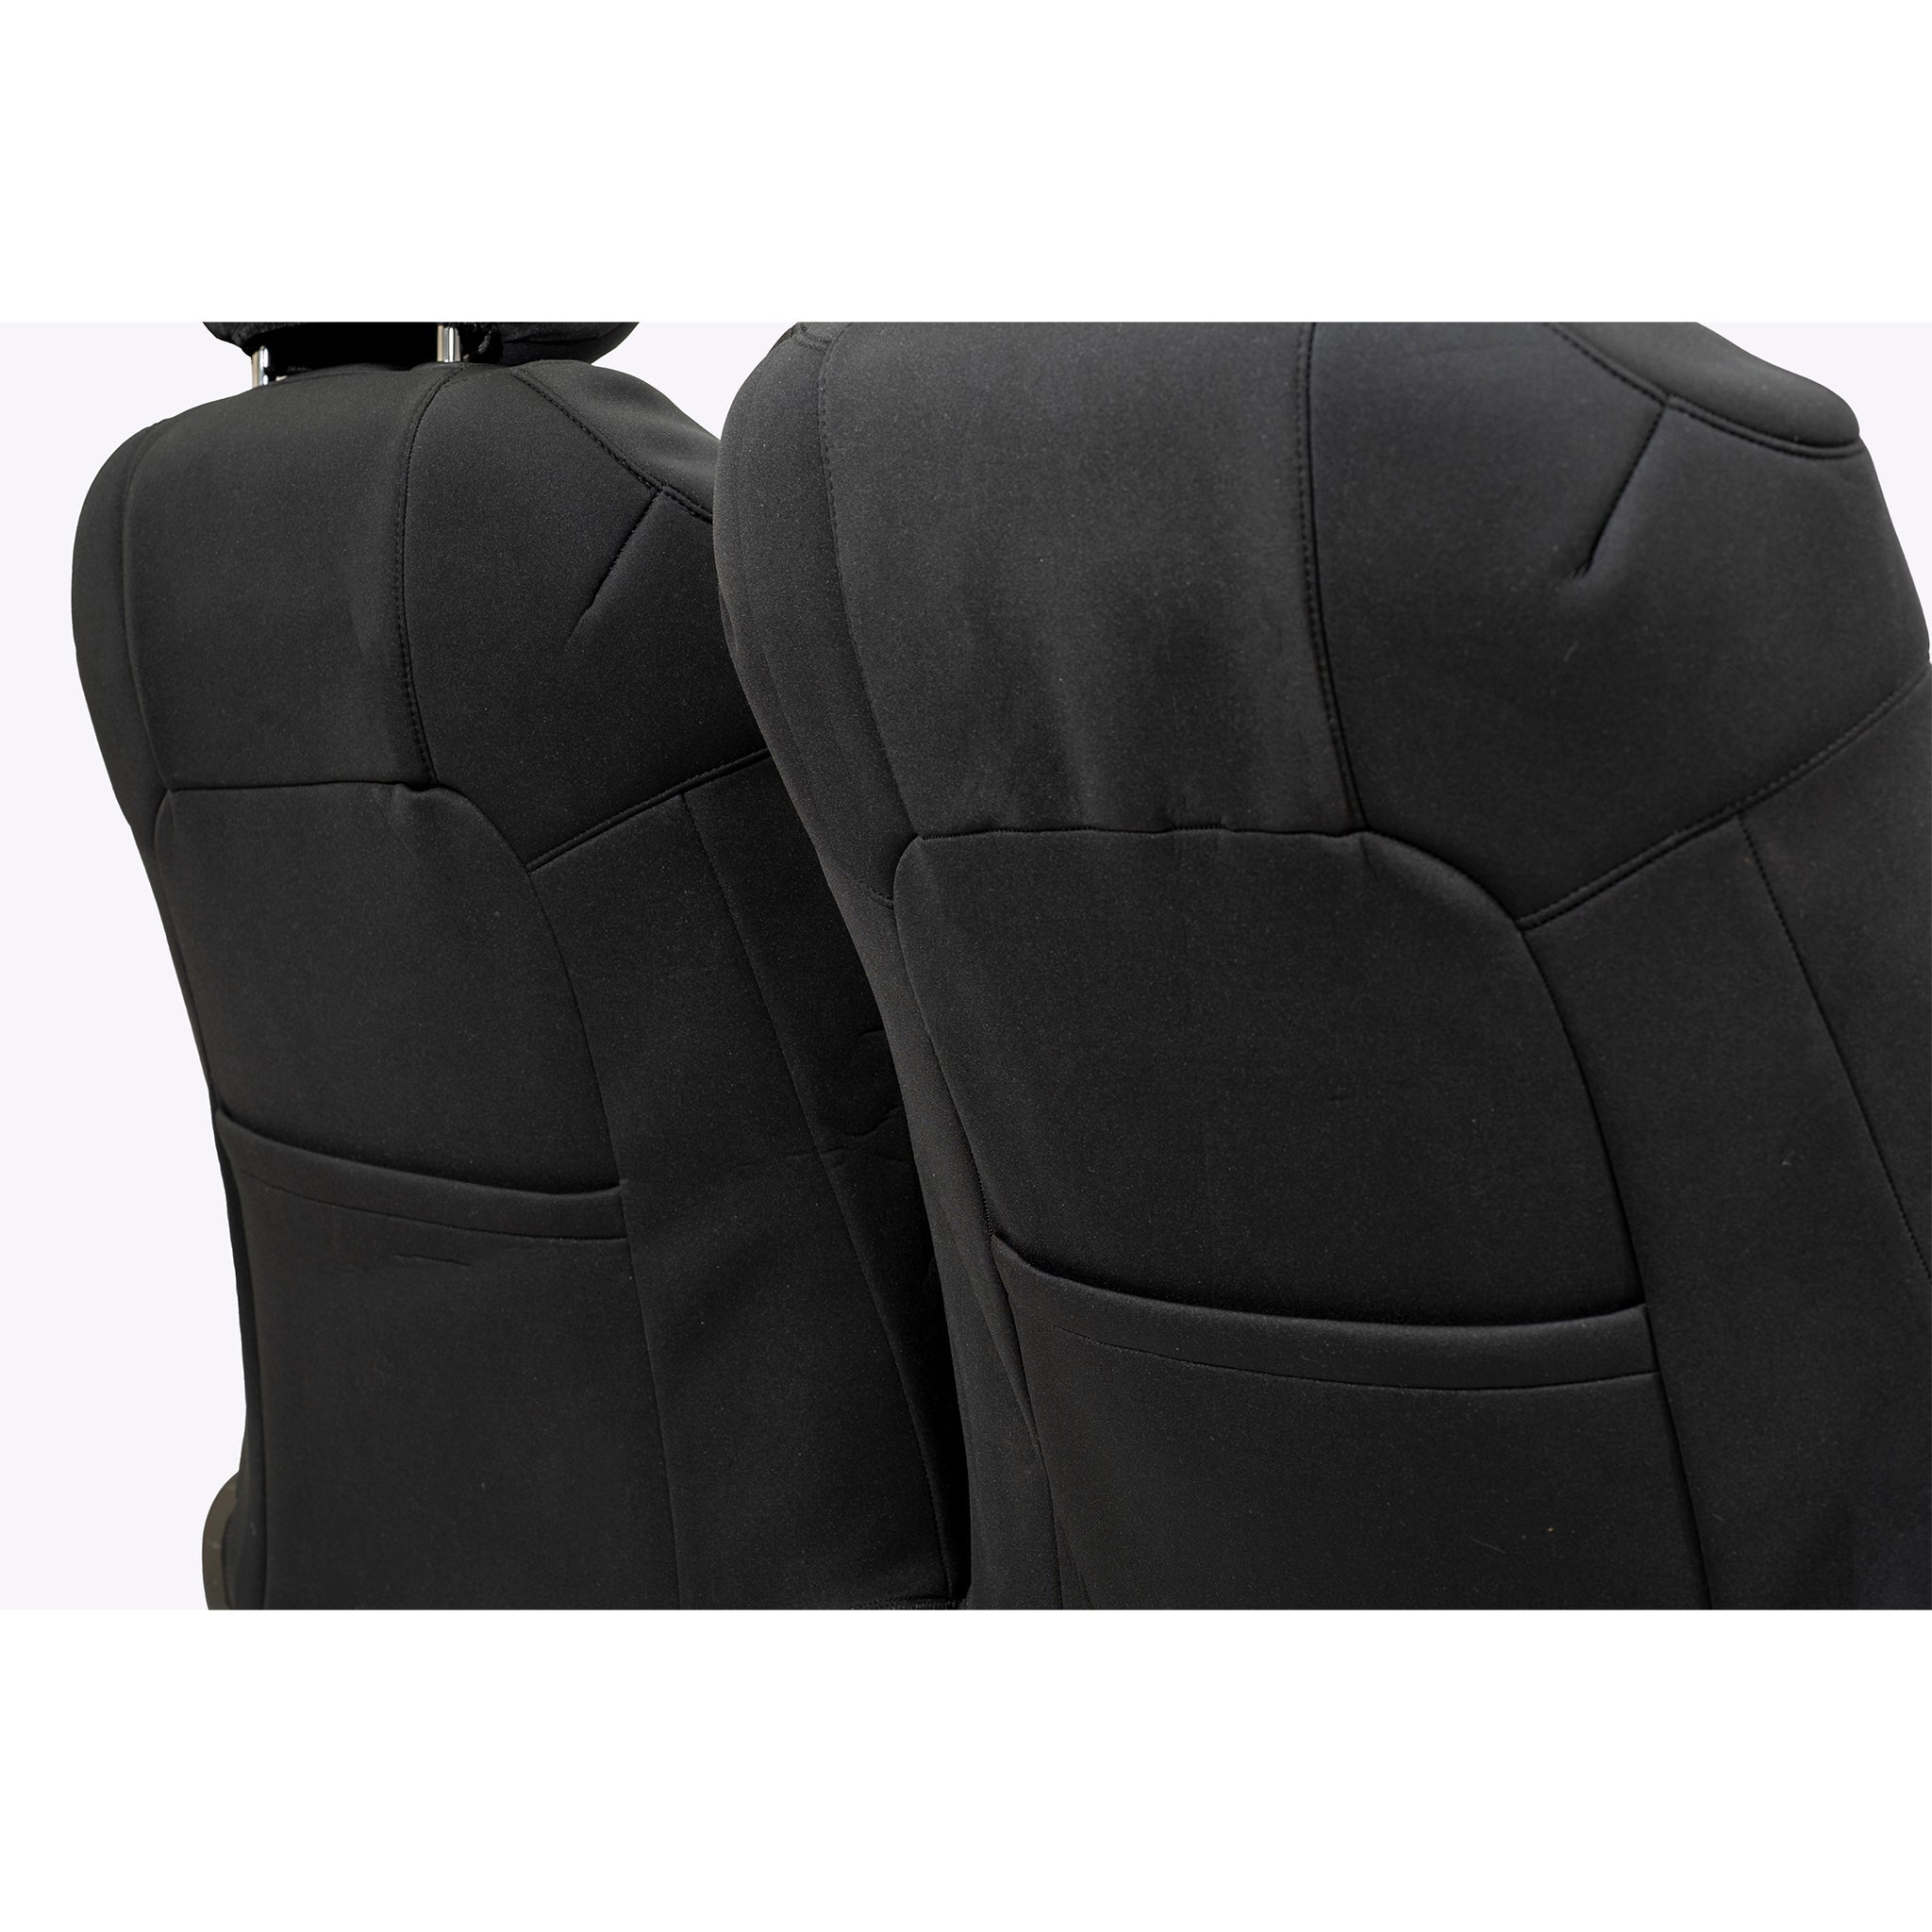 Sharkskin Seat Covers- Suitable for Toyota Hilux Dual Cab (2005-2015)